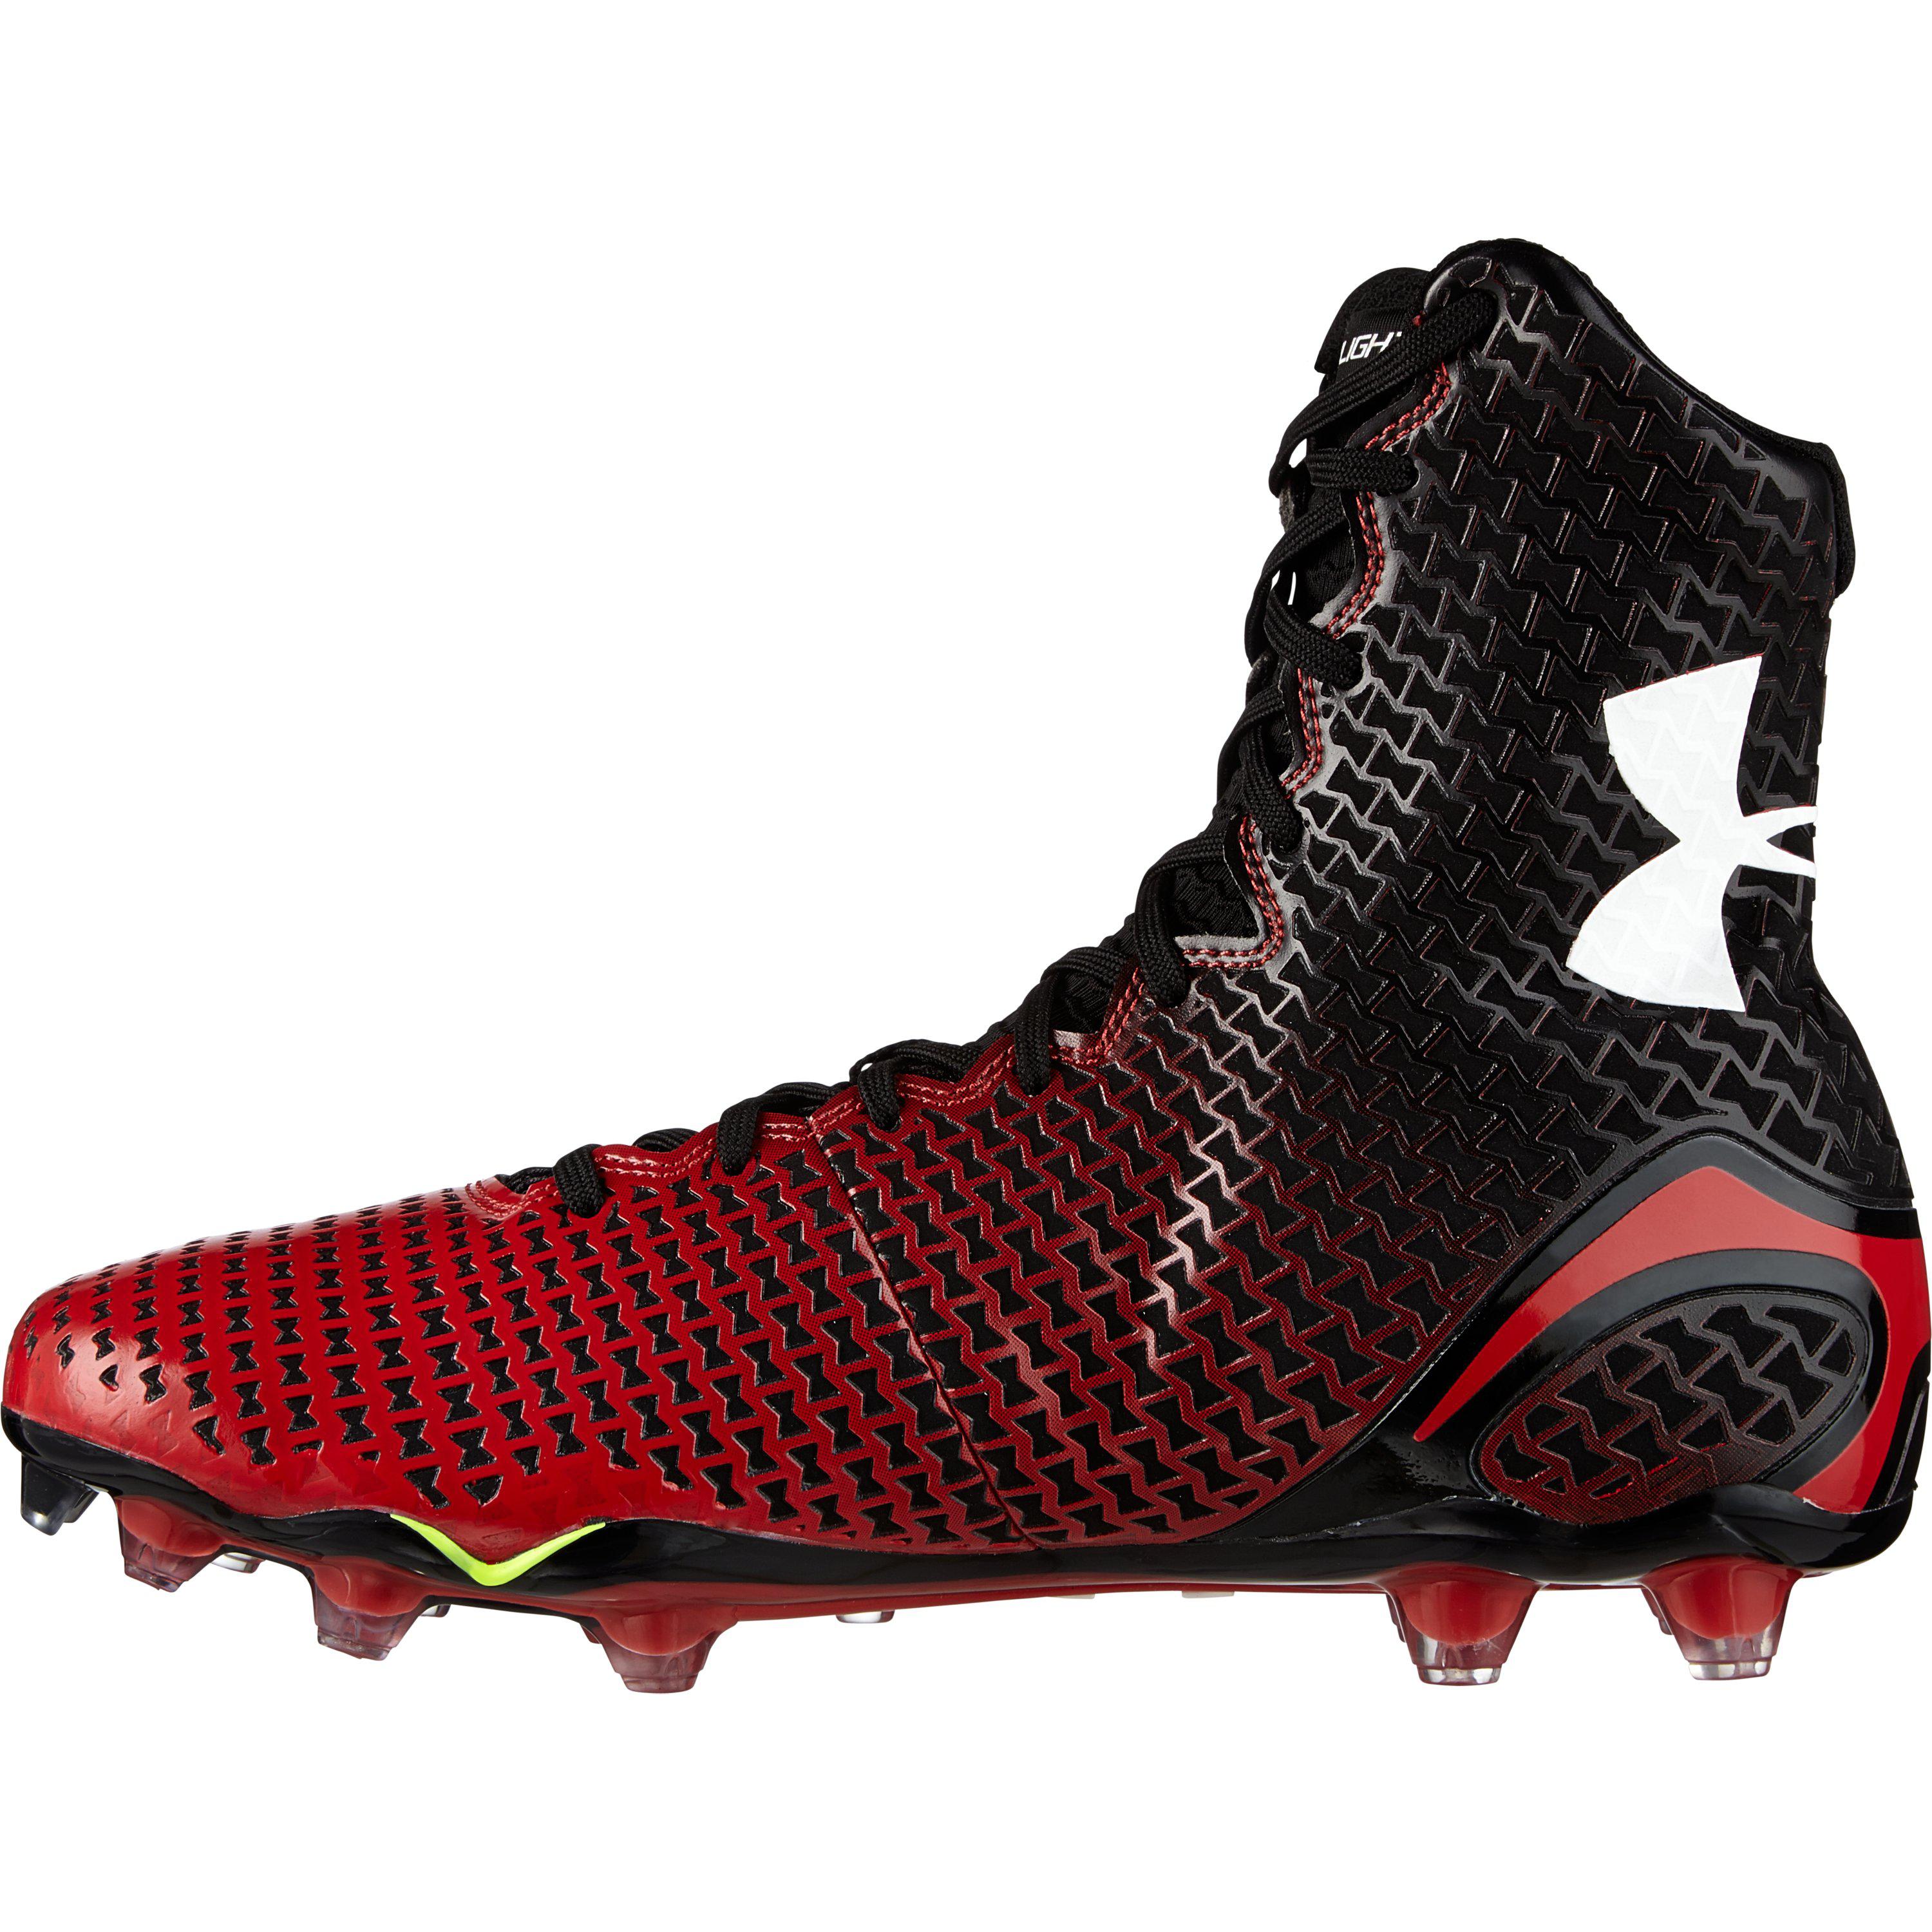 Details about   Under Armour Men's Highlight MC Football Cleats 3000177-001 BLACK 